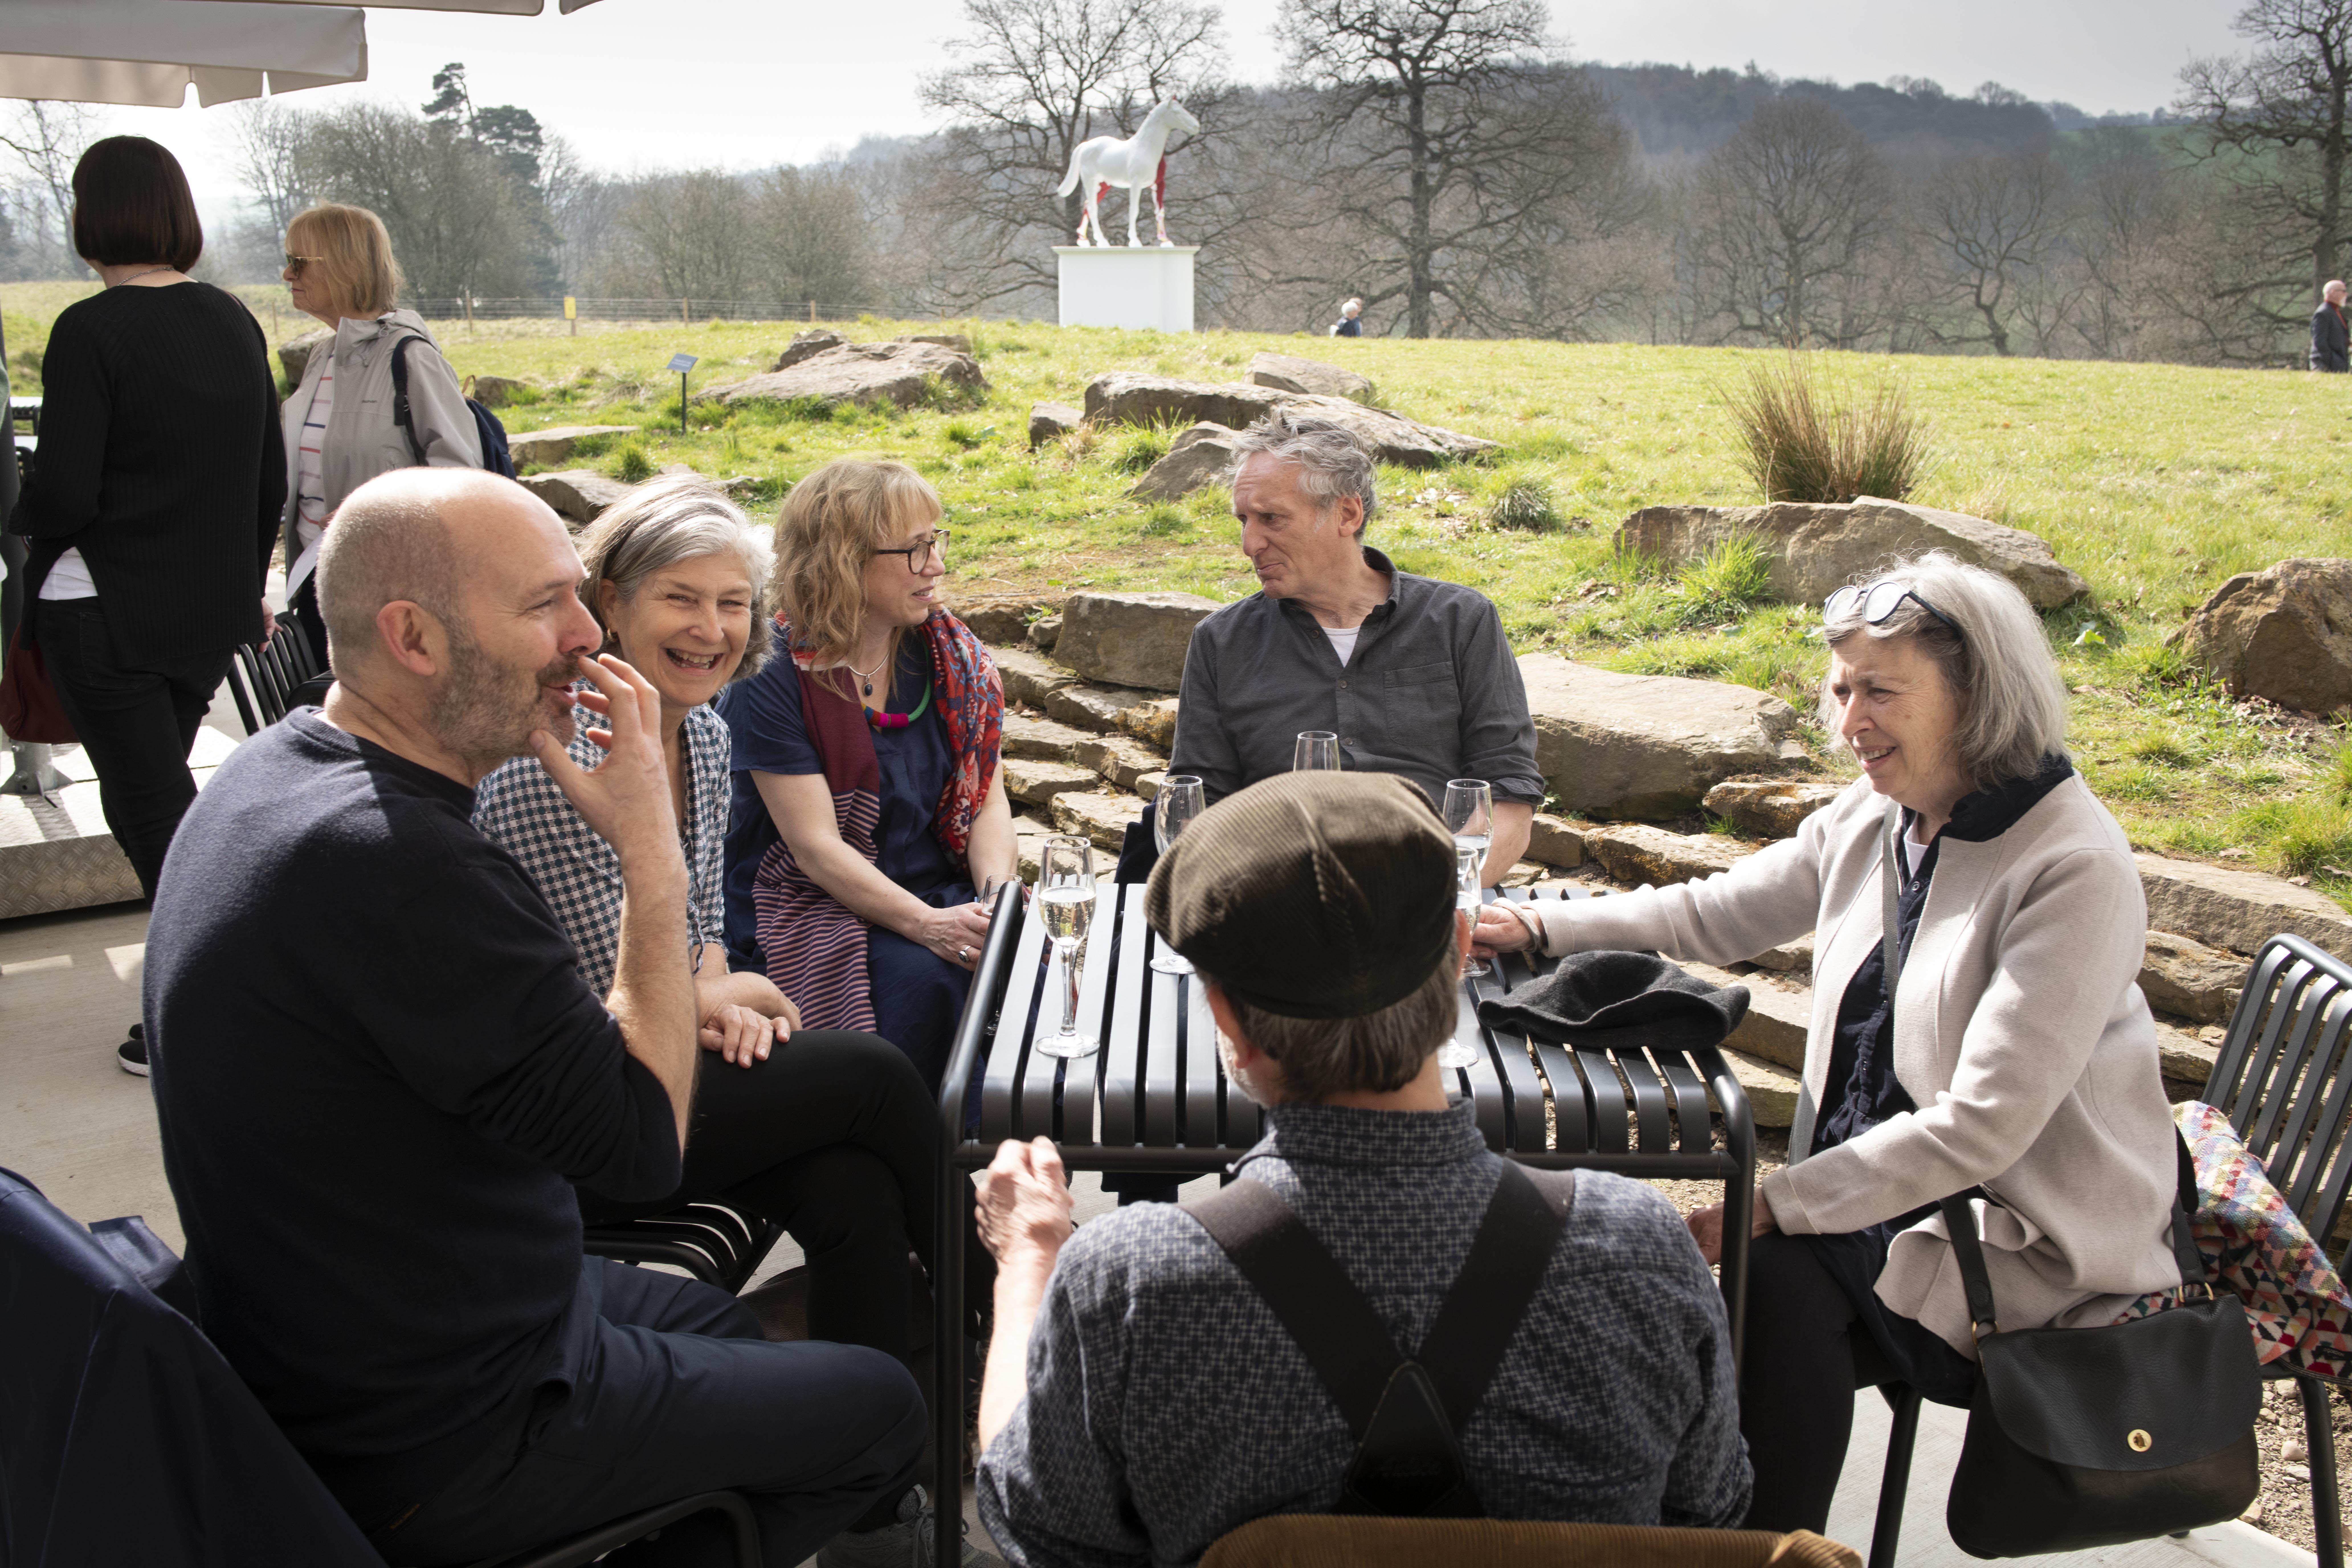 A group of people sat talking at a table outside with views overlooking YSP parkland.